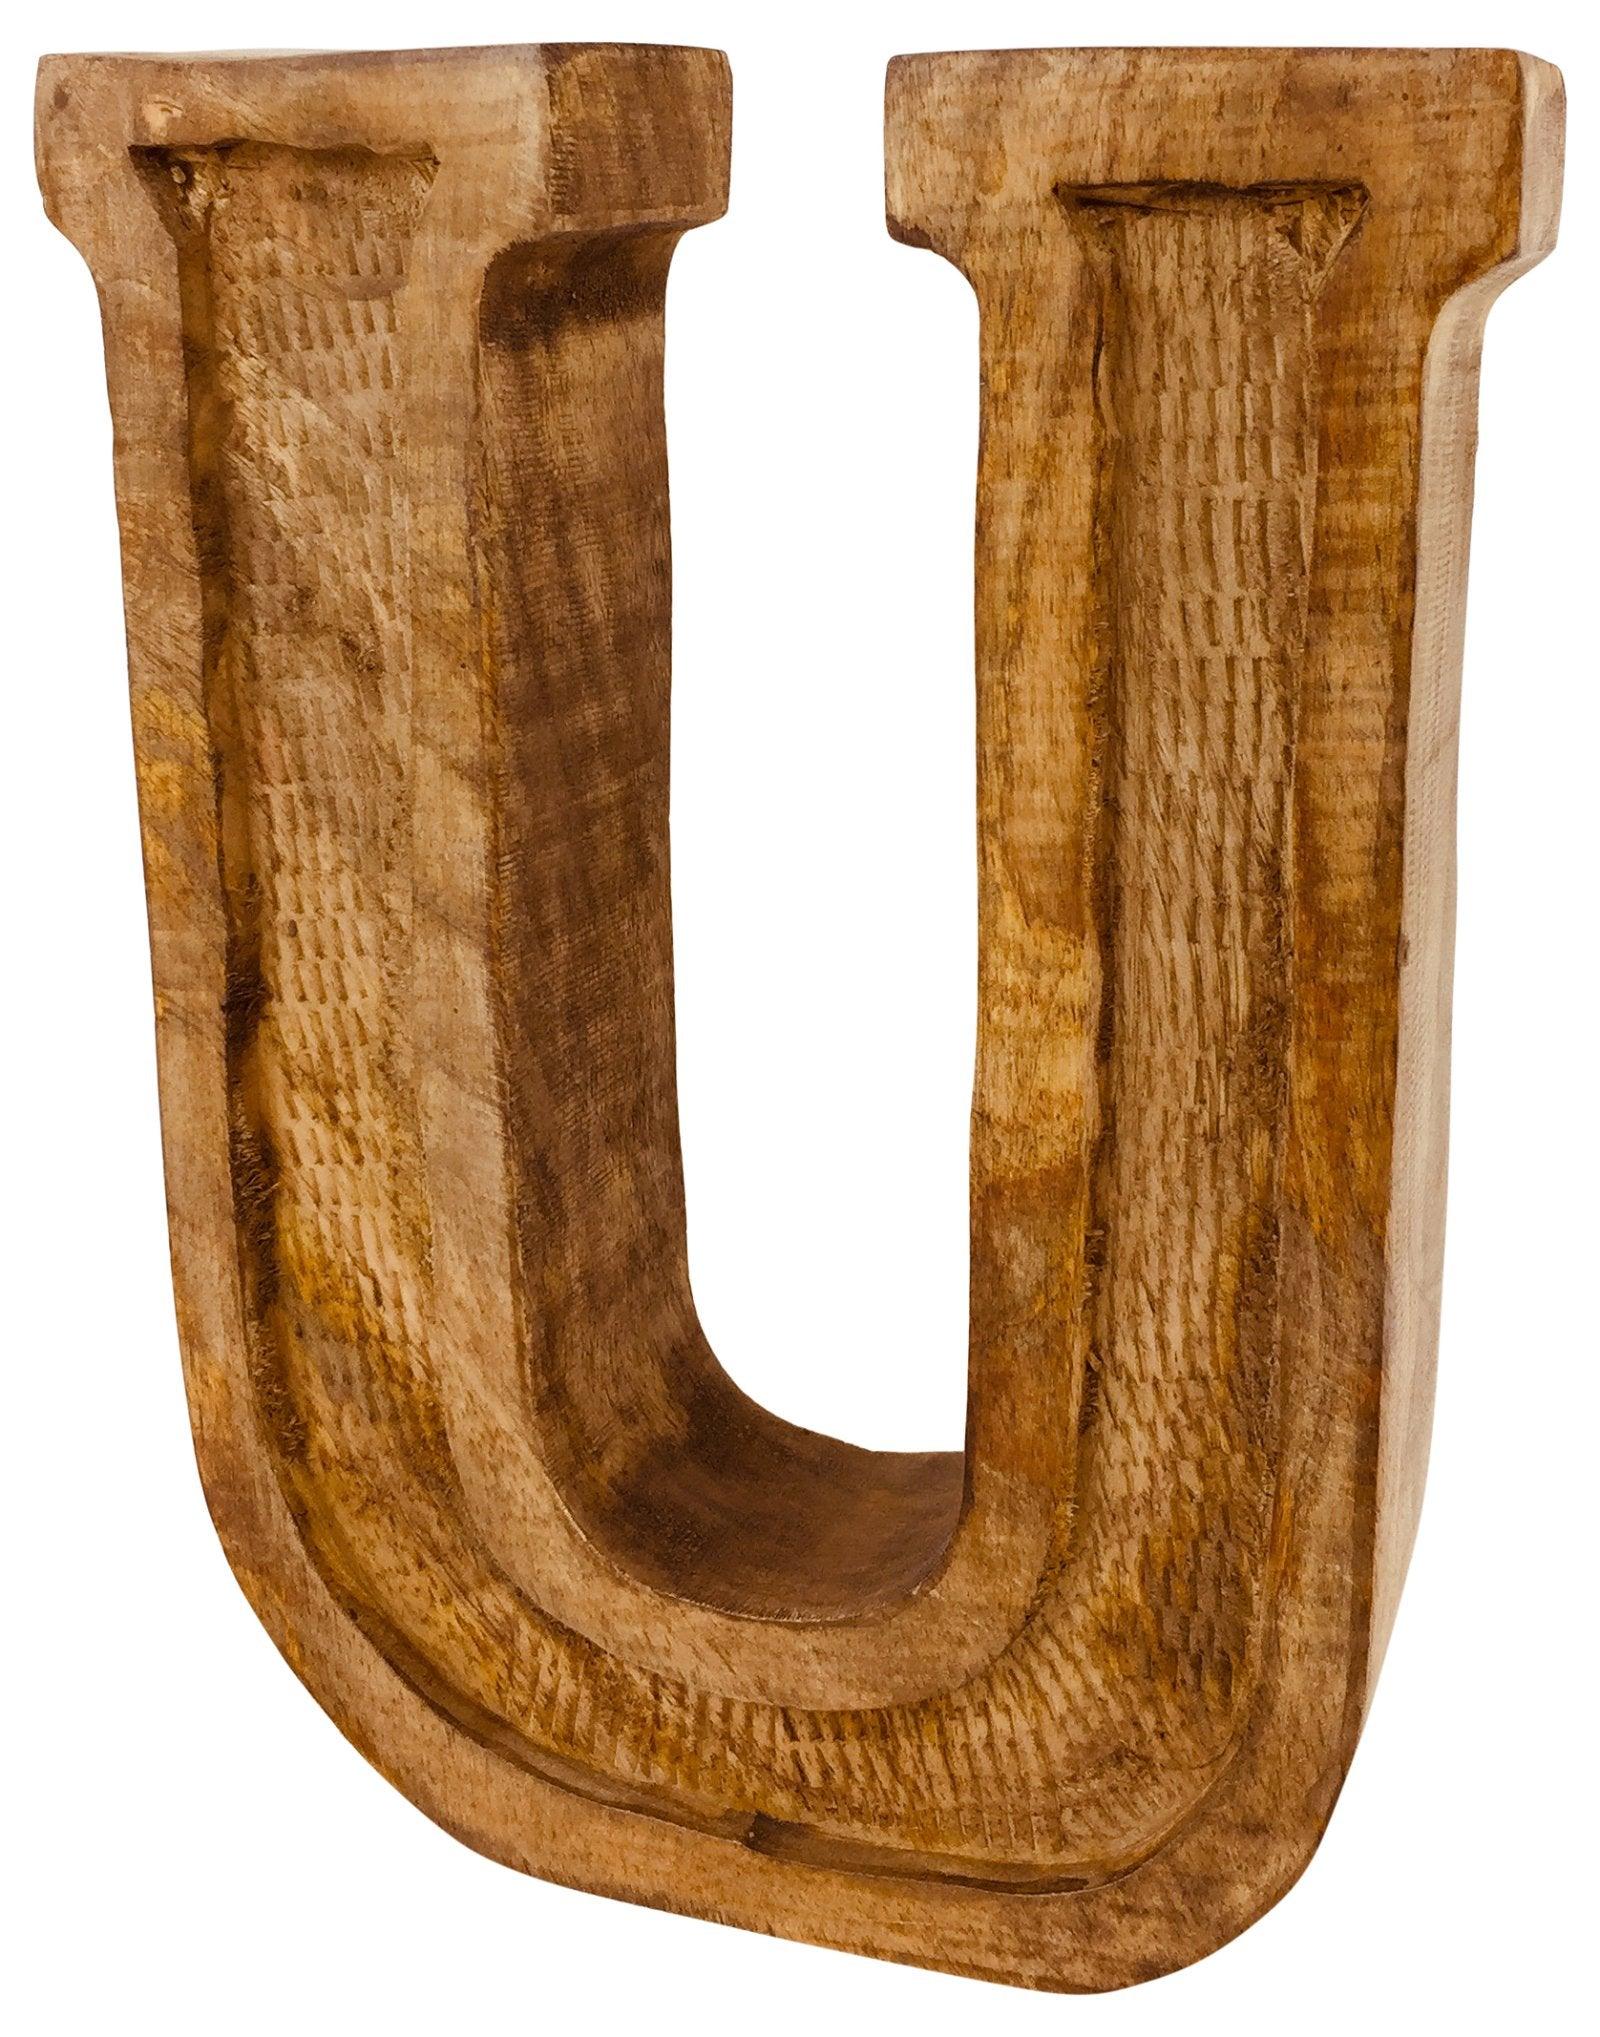 View Hand Carved Wooden Embossed Letter U information